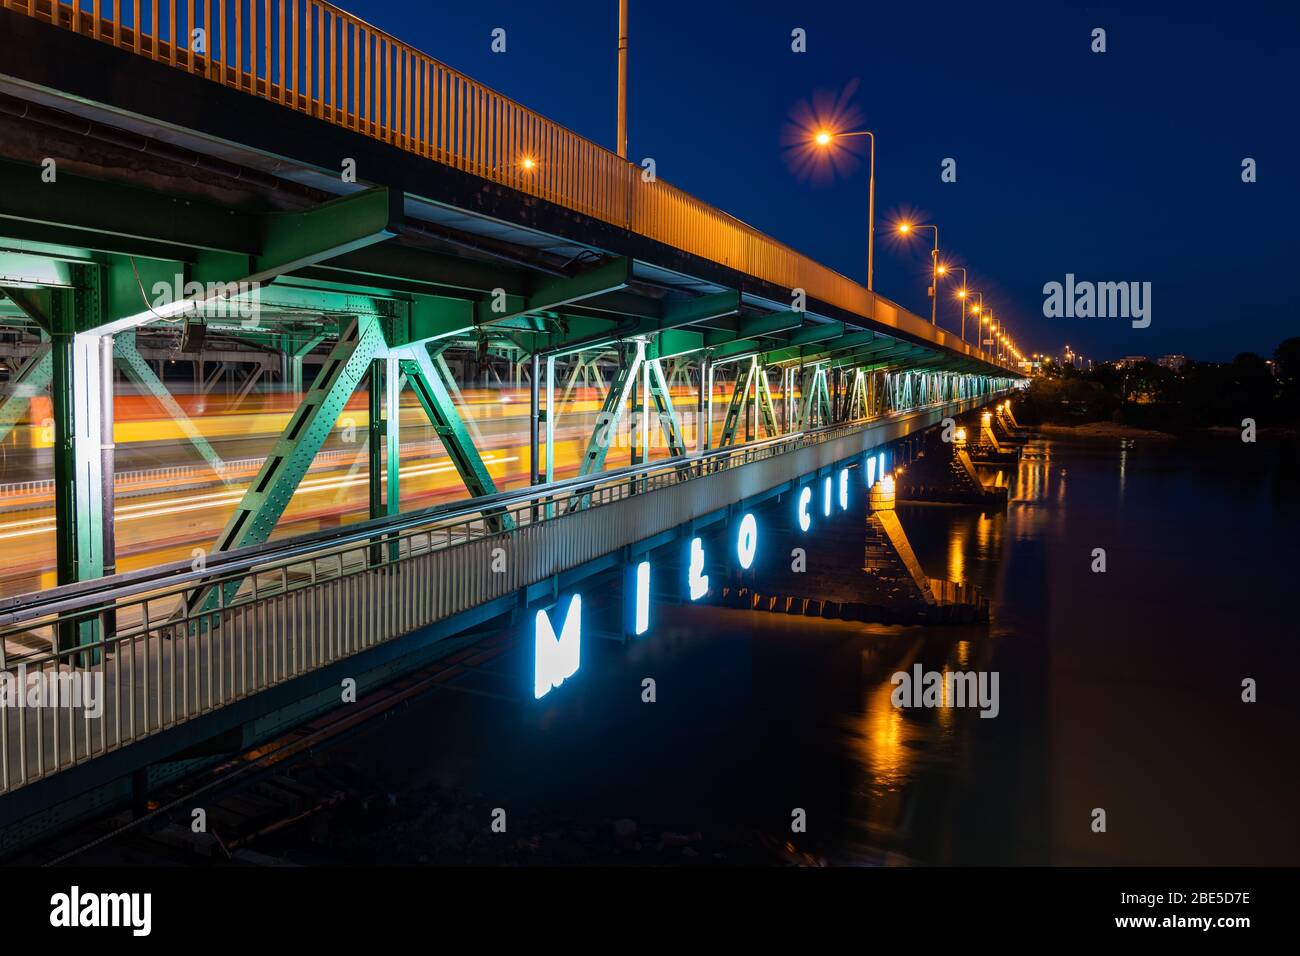 Gdanski Bridge over Vistula river at night in city of Warsaw in Poland, neon sign in Polish - 'Nice To See You', tram light trails on lower level of d Stock Photo